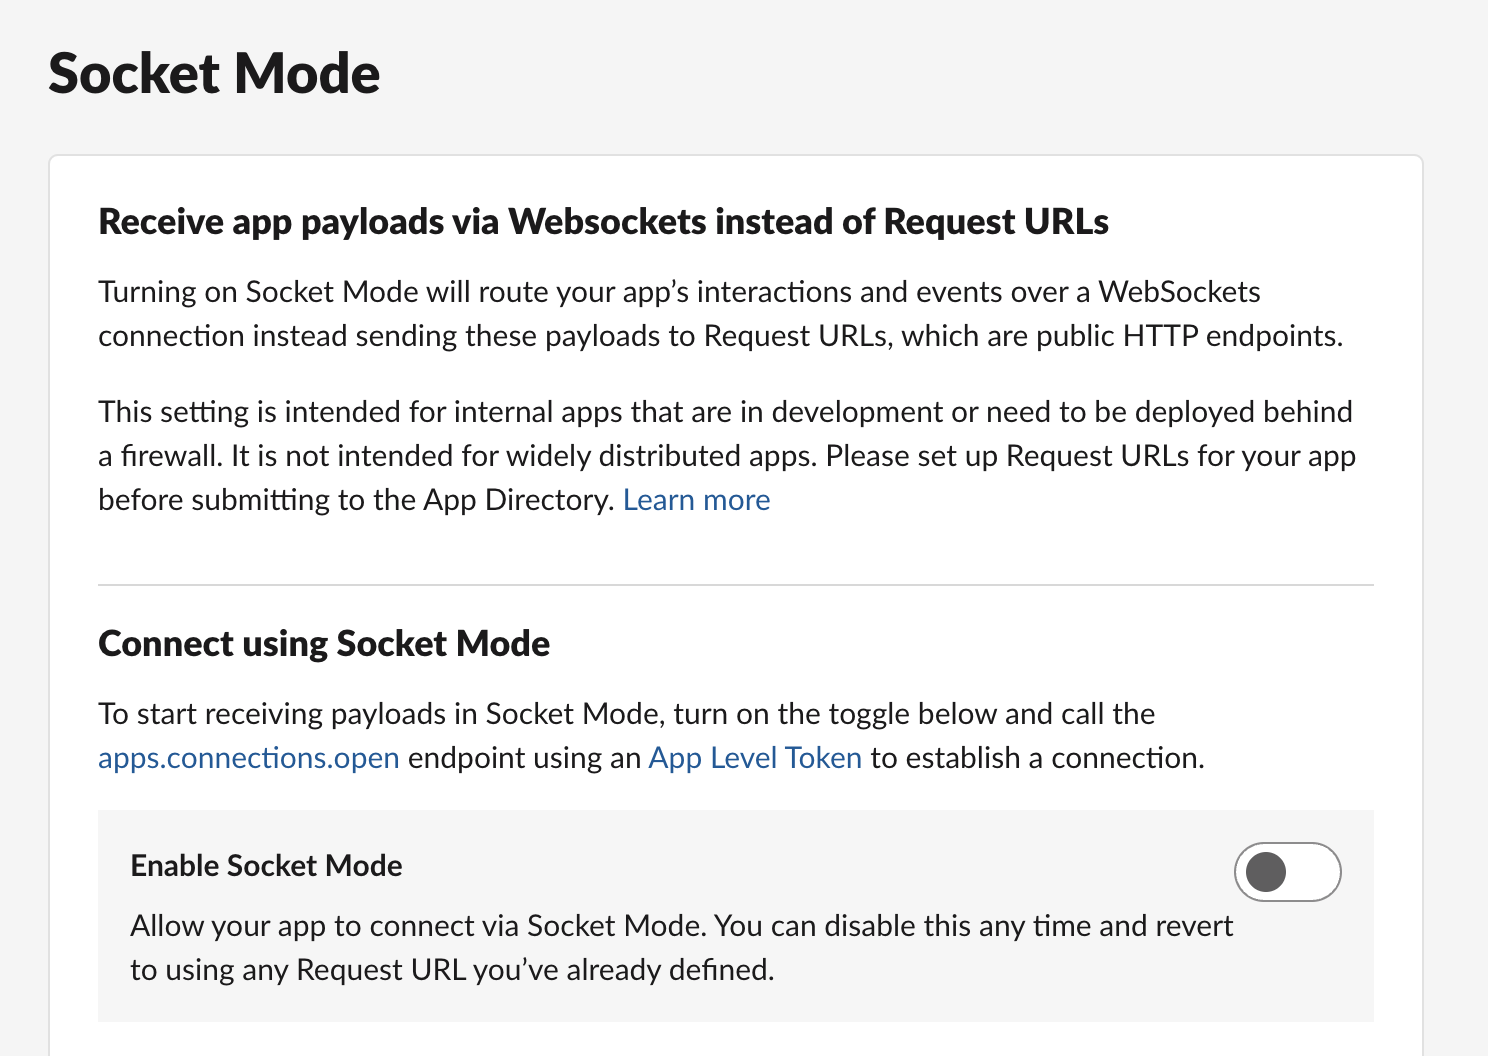 enable socket mode for your app